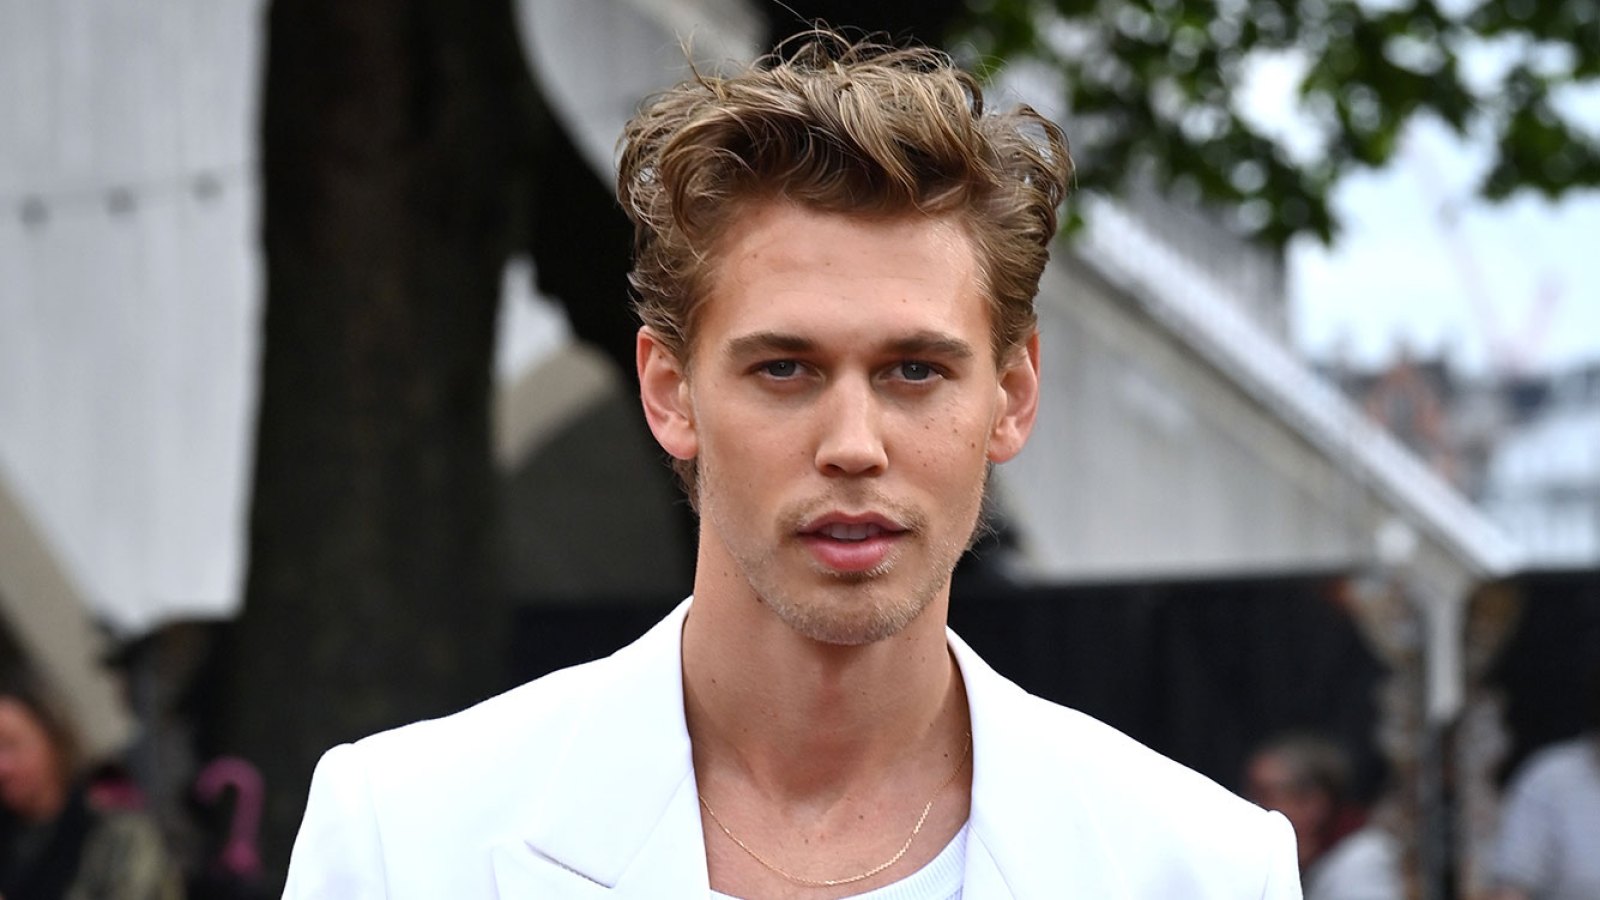 Austin Butler Went Home In Tears After Elvis Director Ordered People to Heckle Him About His Singing